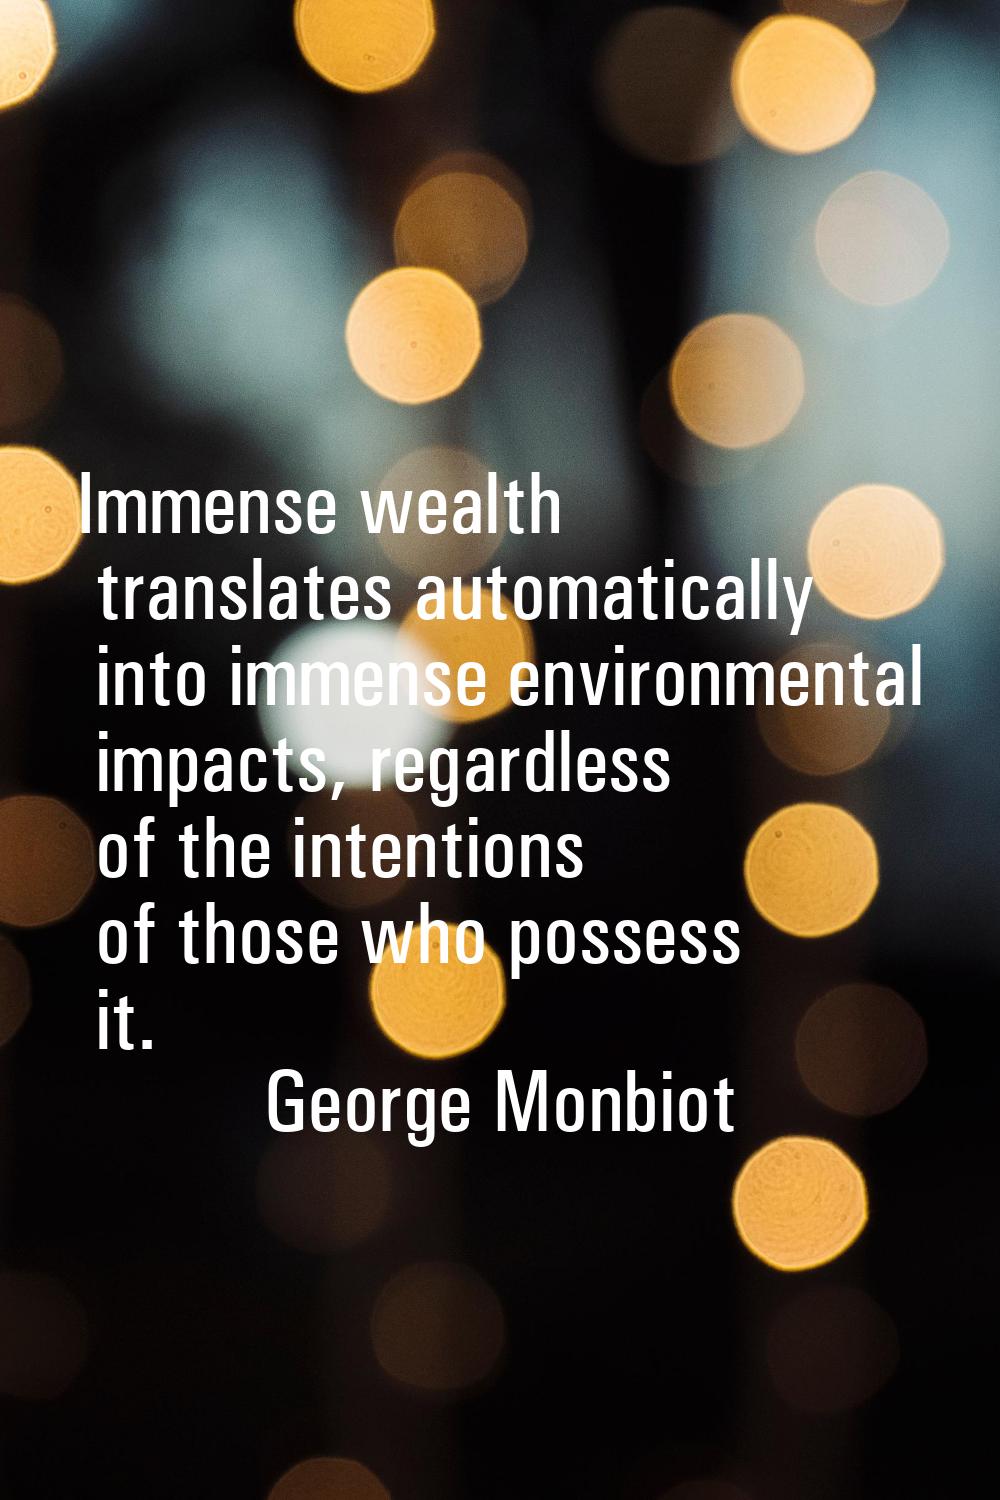 Immense wealth translates automatically into immense environmental impacts, regardless of the inten